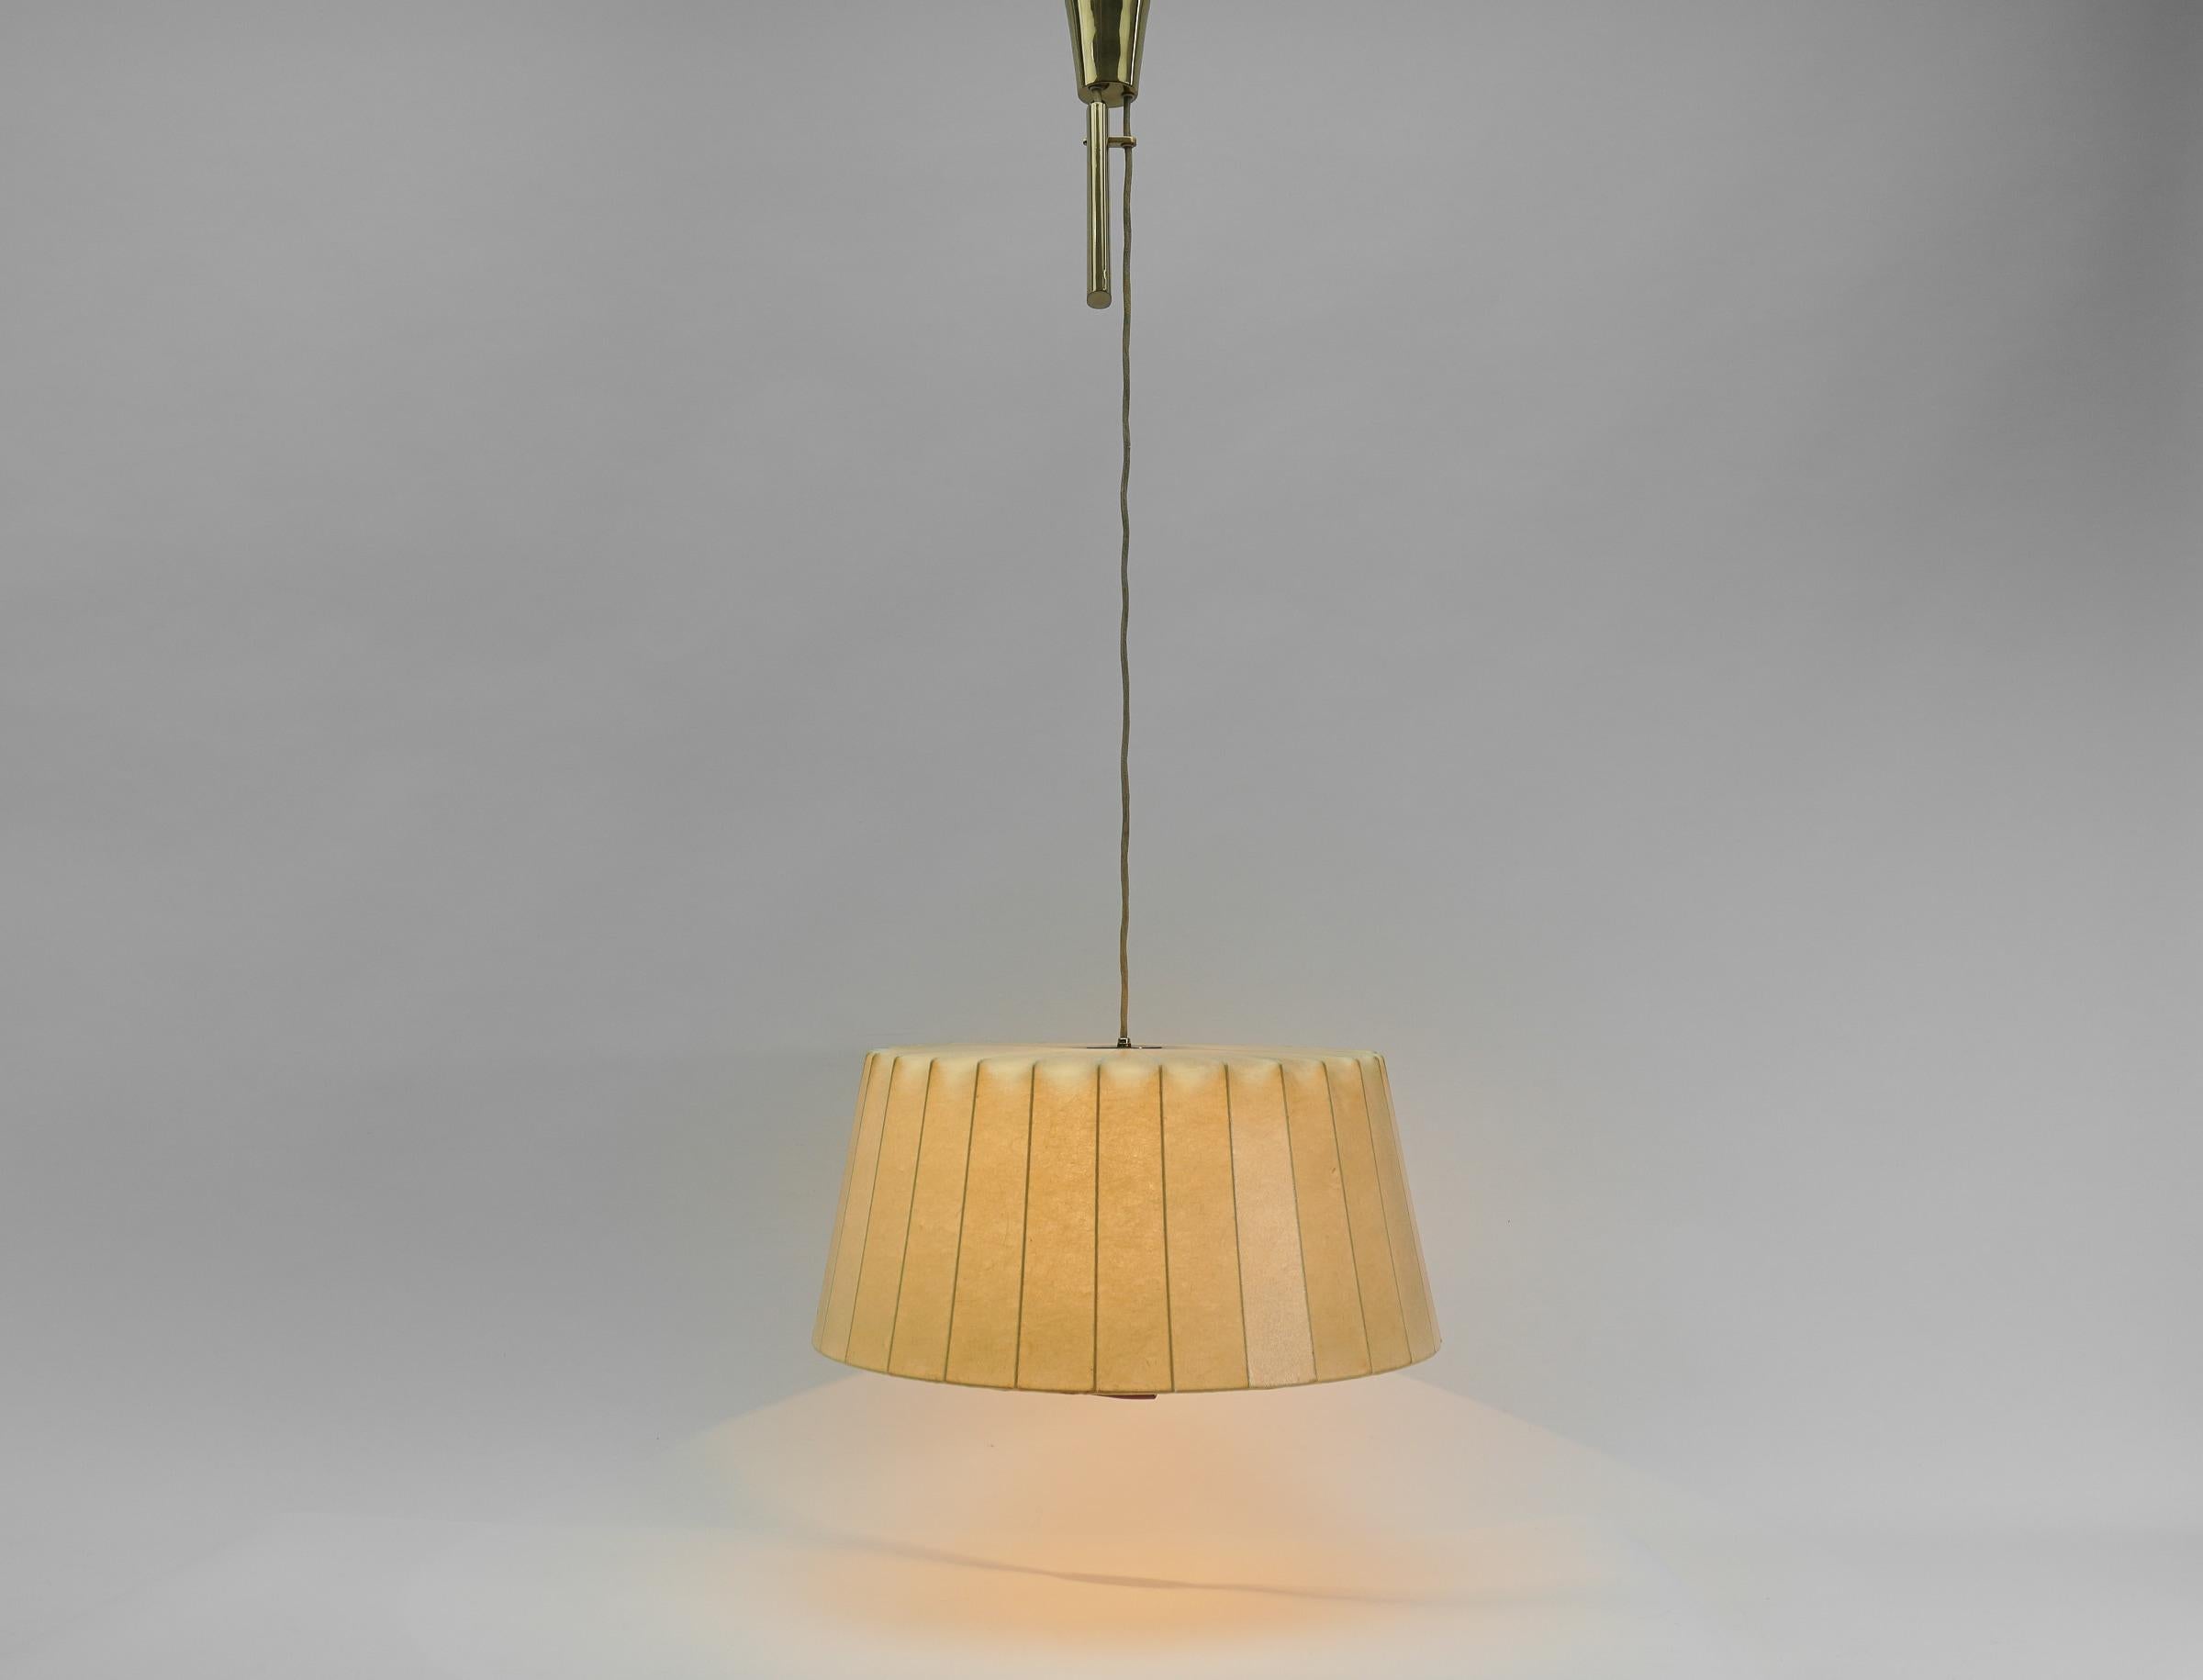 Mid-Century Modern Lovely Cocoon Counterweight Hanging Lamp by Münchener Werkstätten, 1950s Germany For Sale